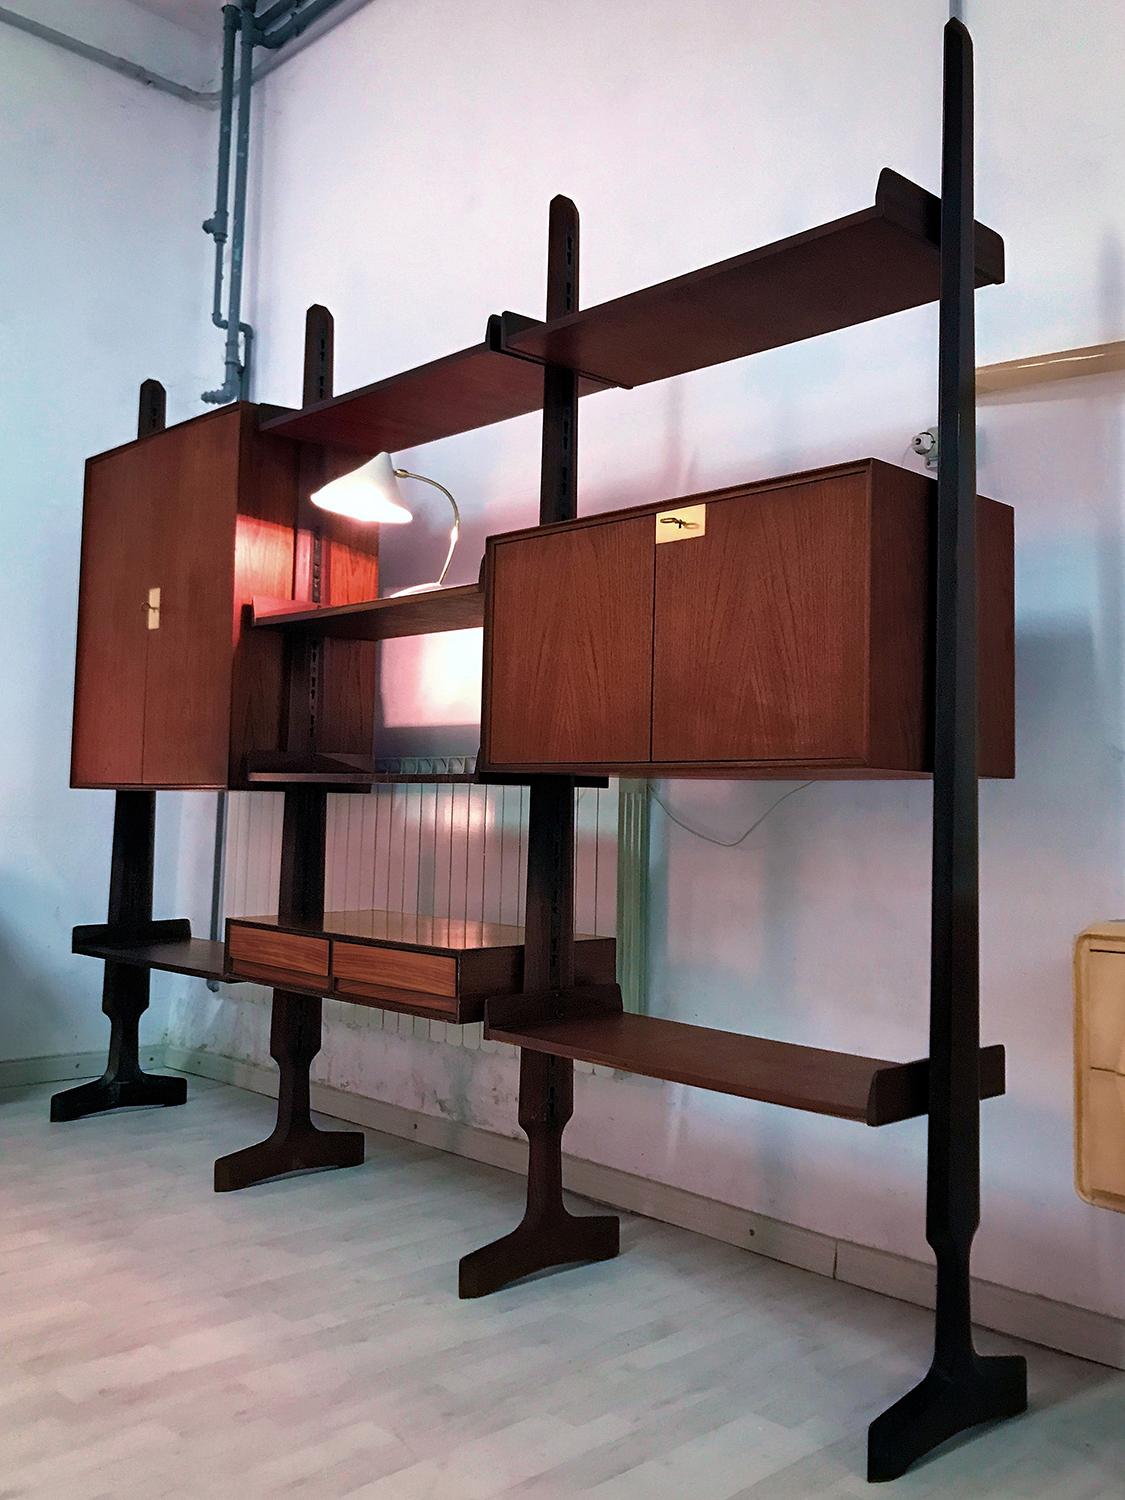 This bookcase is composed of three modules freestanding, suitable to be moving and placed at will in the home, equipped with six shelves, two cabinets with doors, and one cabinet with two drawers.
It's a versatile item that offers plenty of room